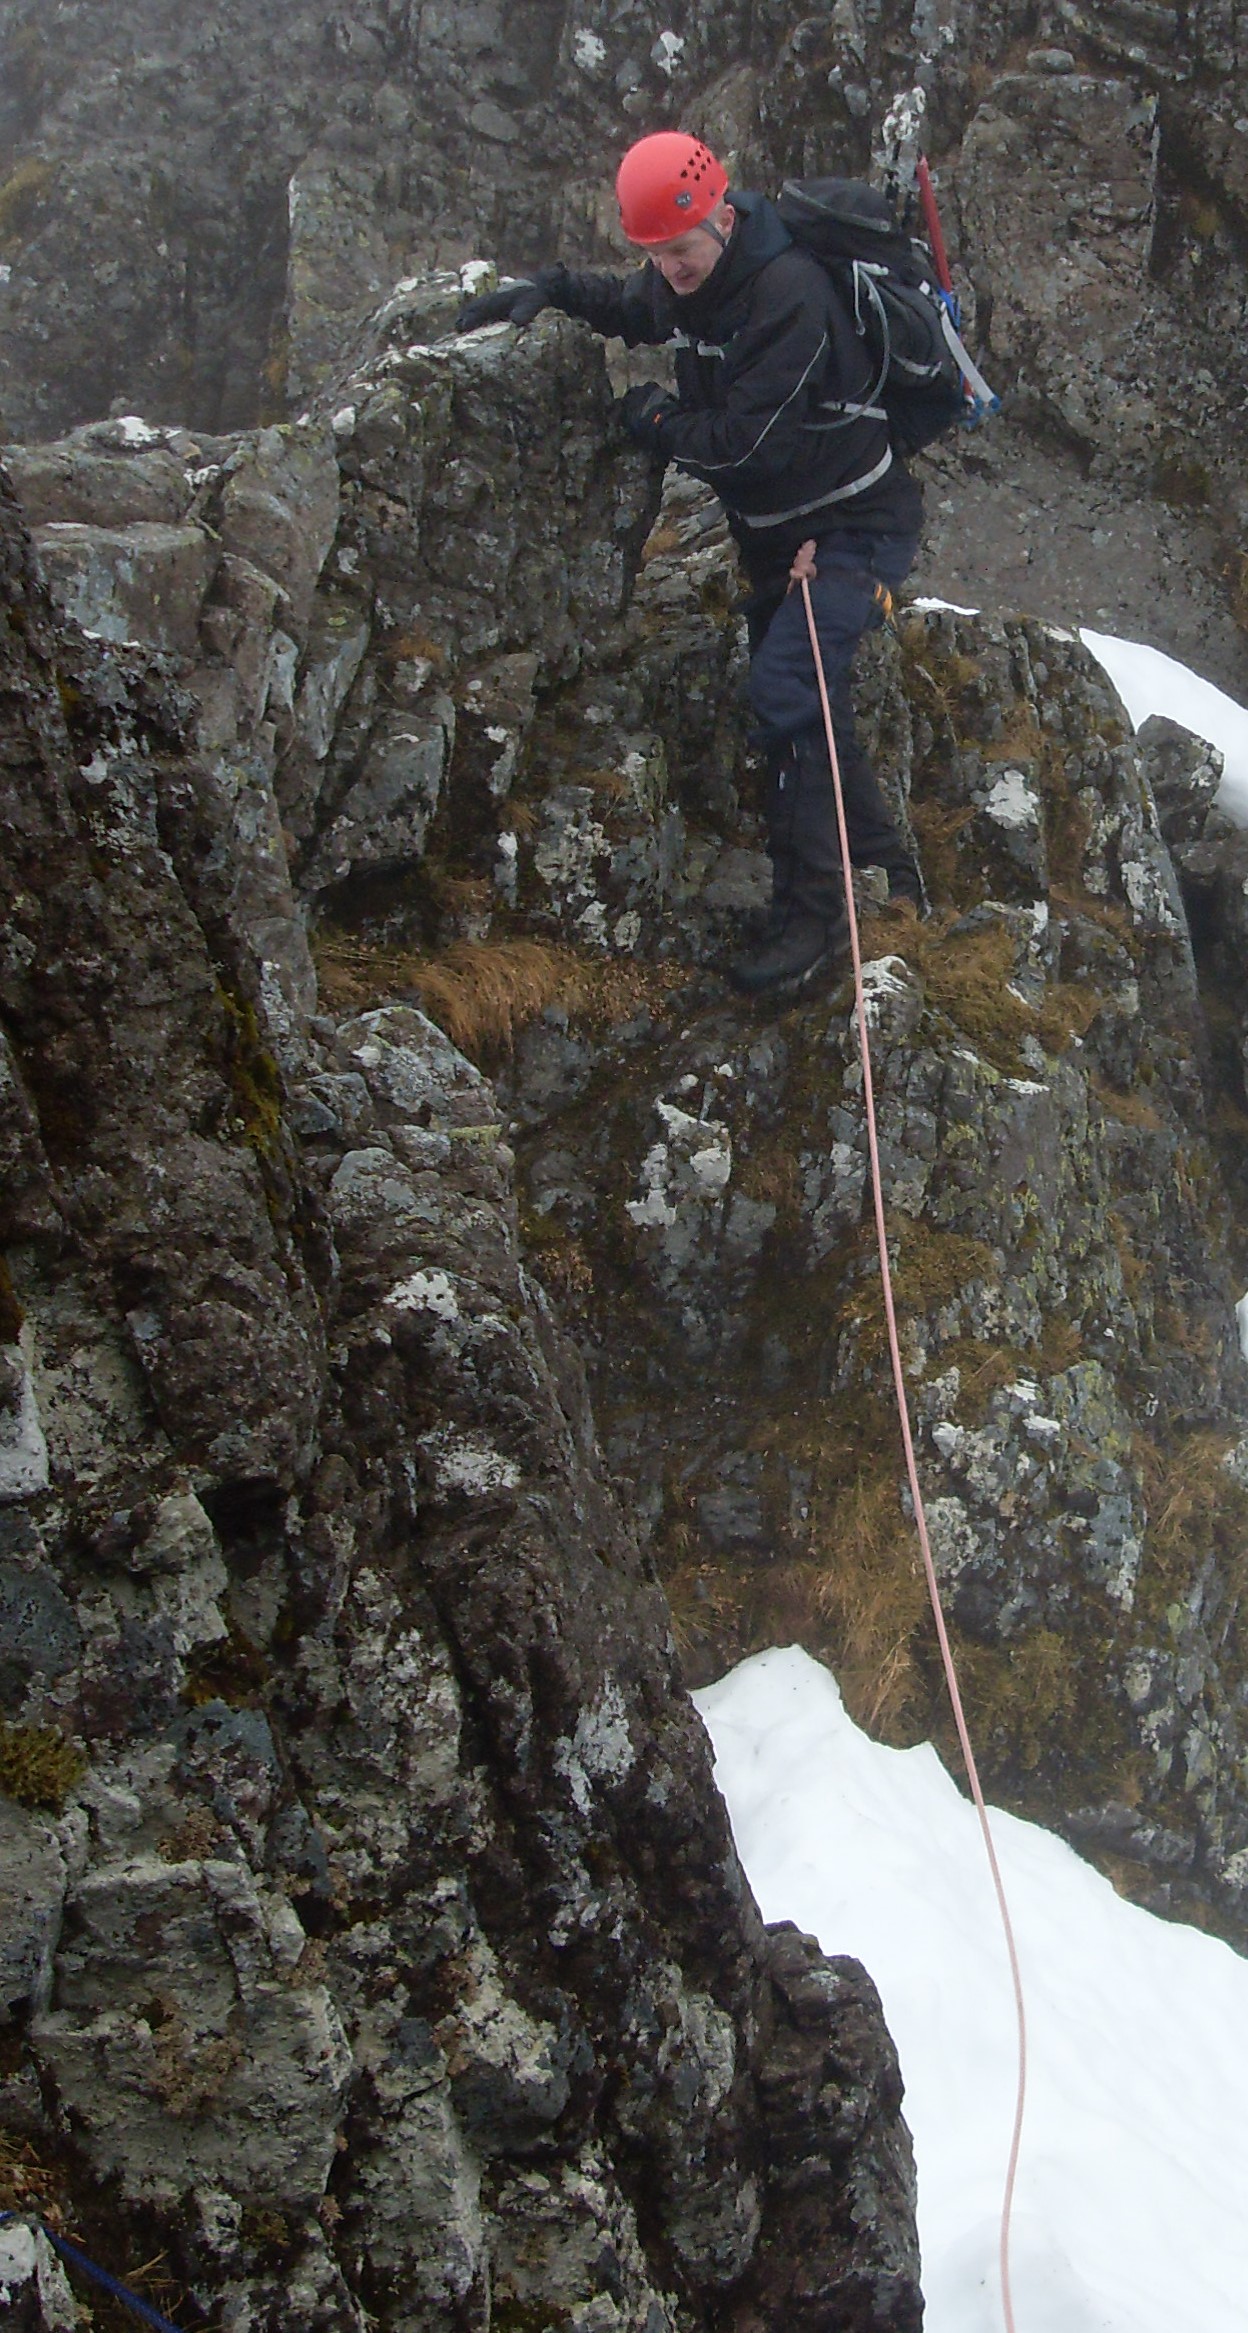 Reg Harris Taking care on greasy rock in mixed winter conditions on the Aonach Eagach Ridge(the narrowest ridge on the British mainland)